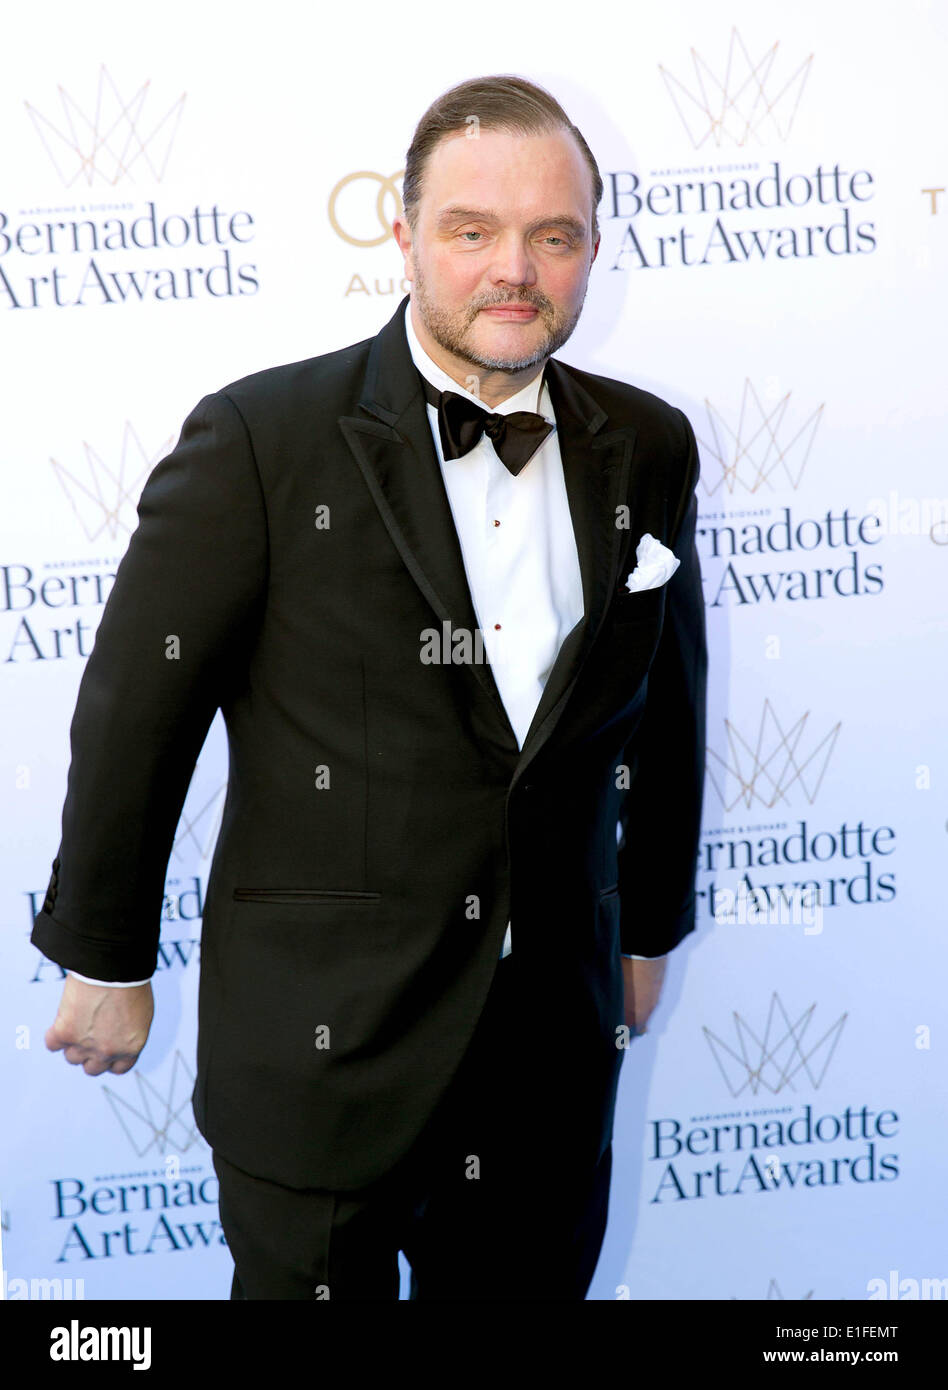 Alexander Prince of Schaumburg-Lippe arrives for the Bernadotte Art Awards 2014 at the Grand Hotel in Stockholm, 02 June 2014 Photo: Albert Nieboer/ /dpa -NO WIRE SERVICE- Stock Photo